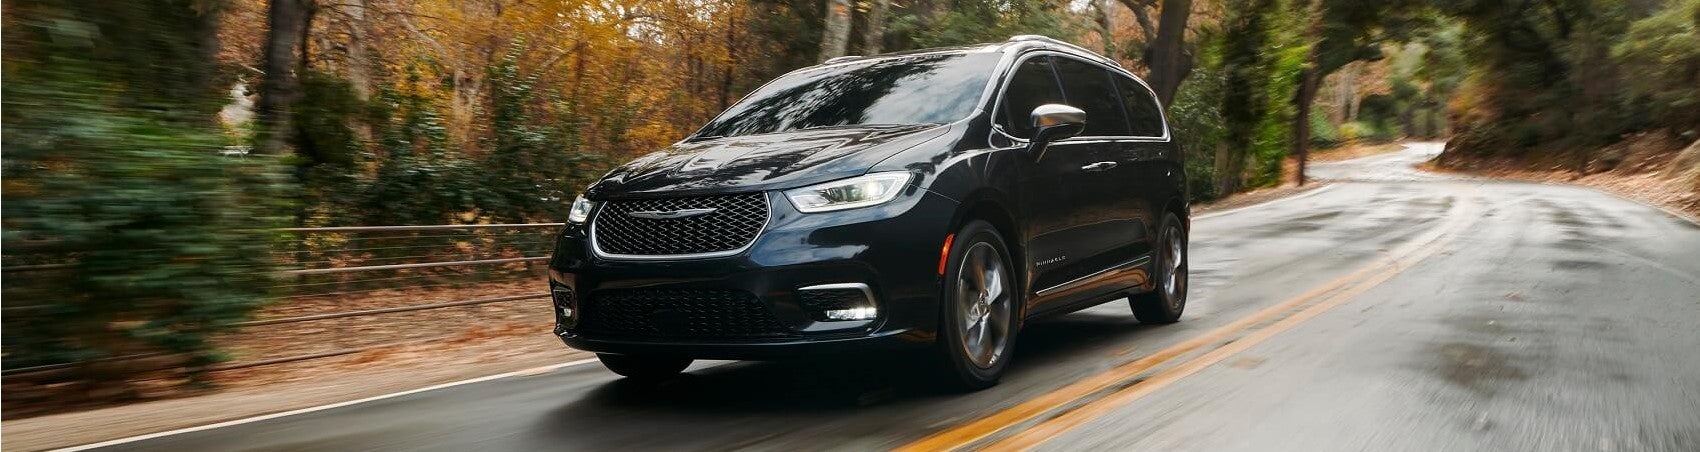 Chrysler Pacifica Black Snipped